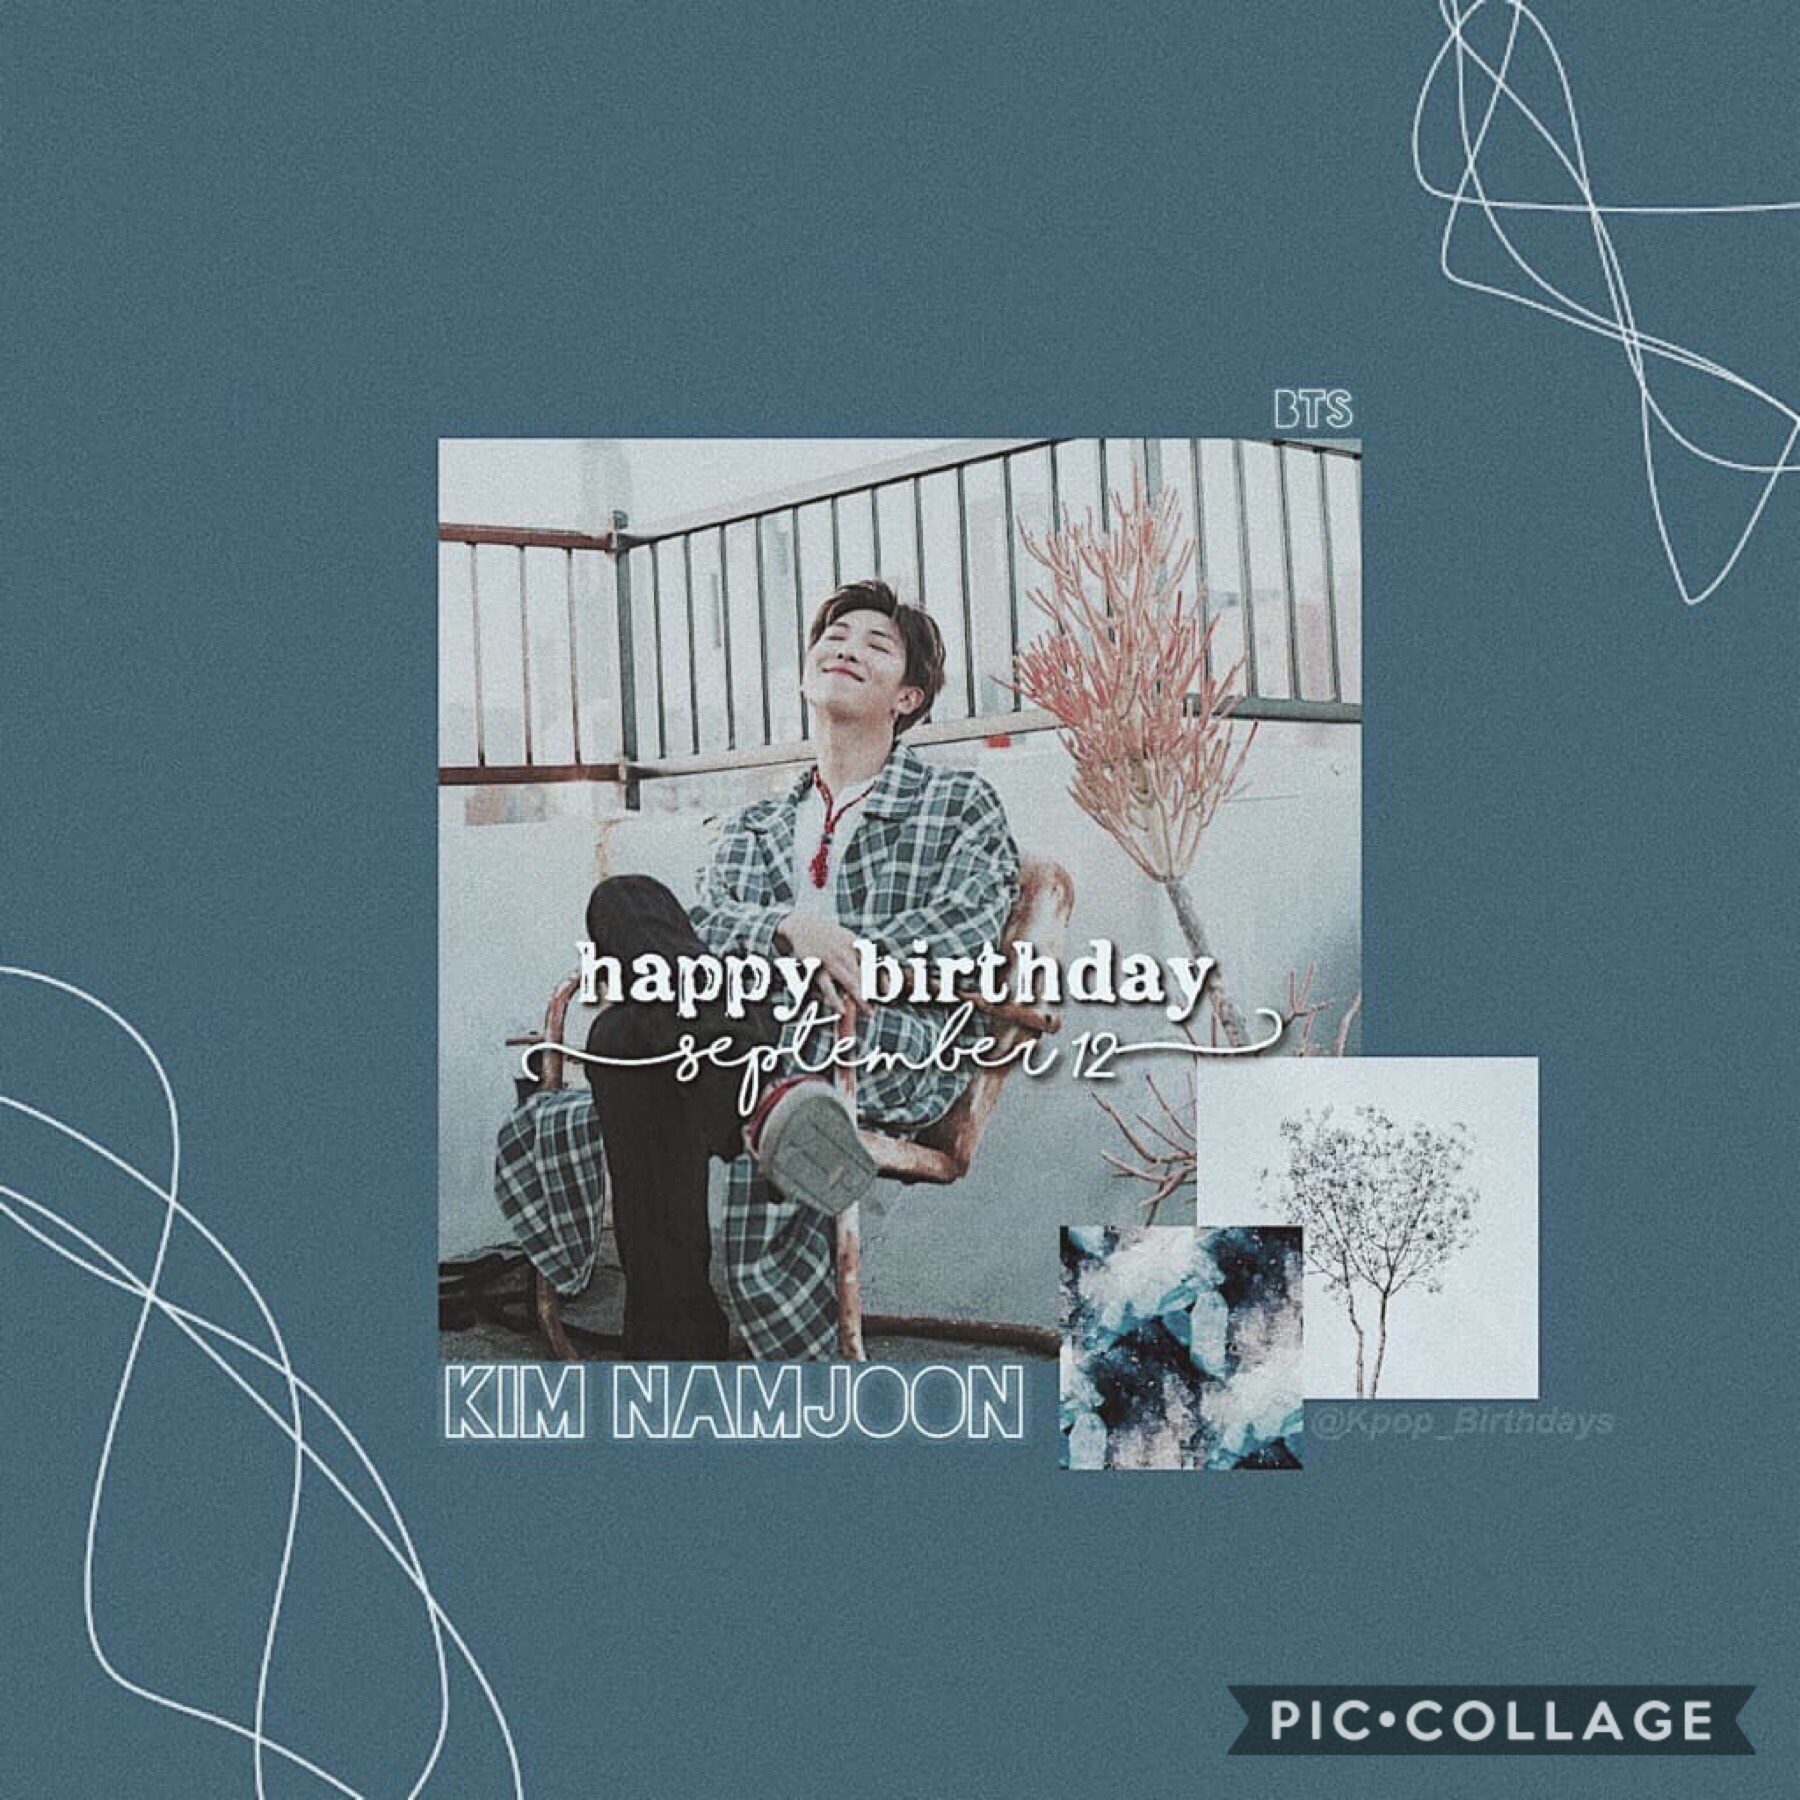 •Kim Namjoon•
Happy birthday to an amazing leader dealing with 6 crackheads🥰
*its currently 12AM rn (Whoop)*
🍃🌴🍃🌴Drea🌴🍃🌴🍃